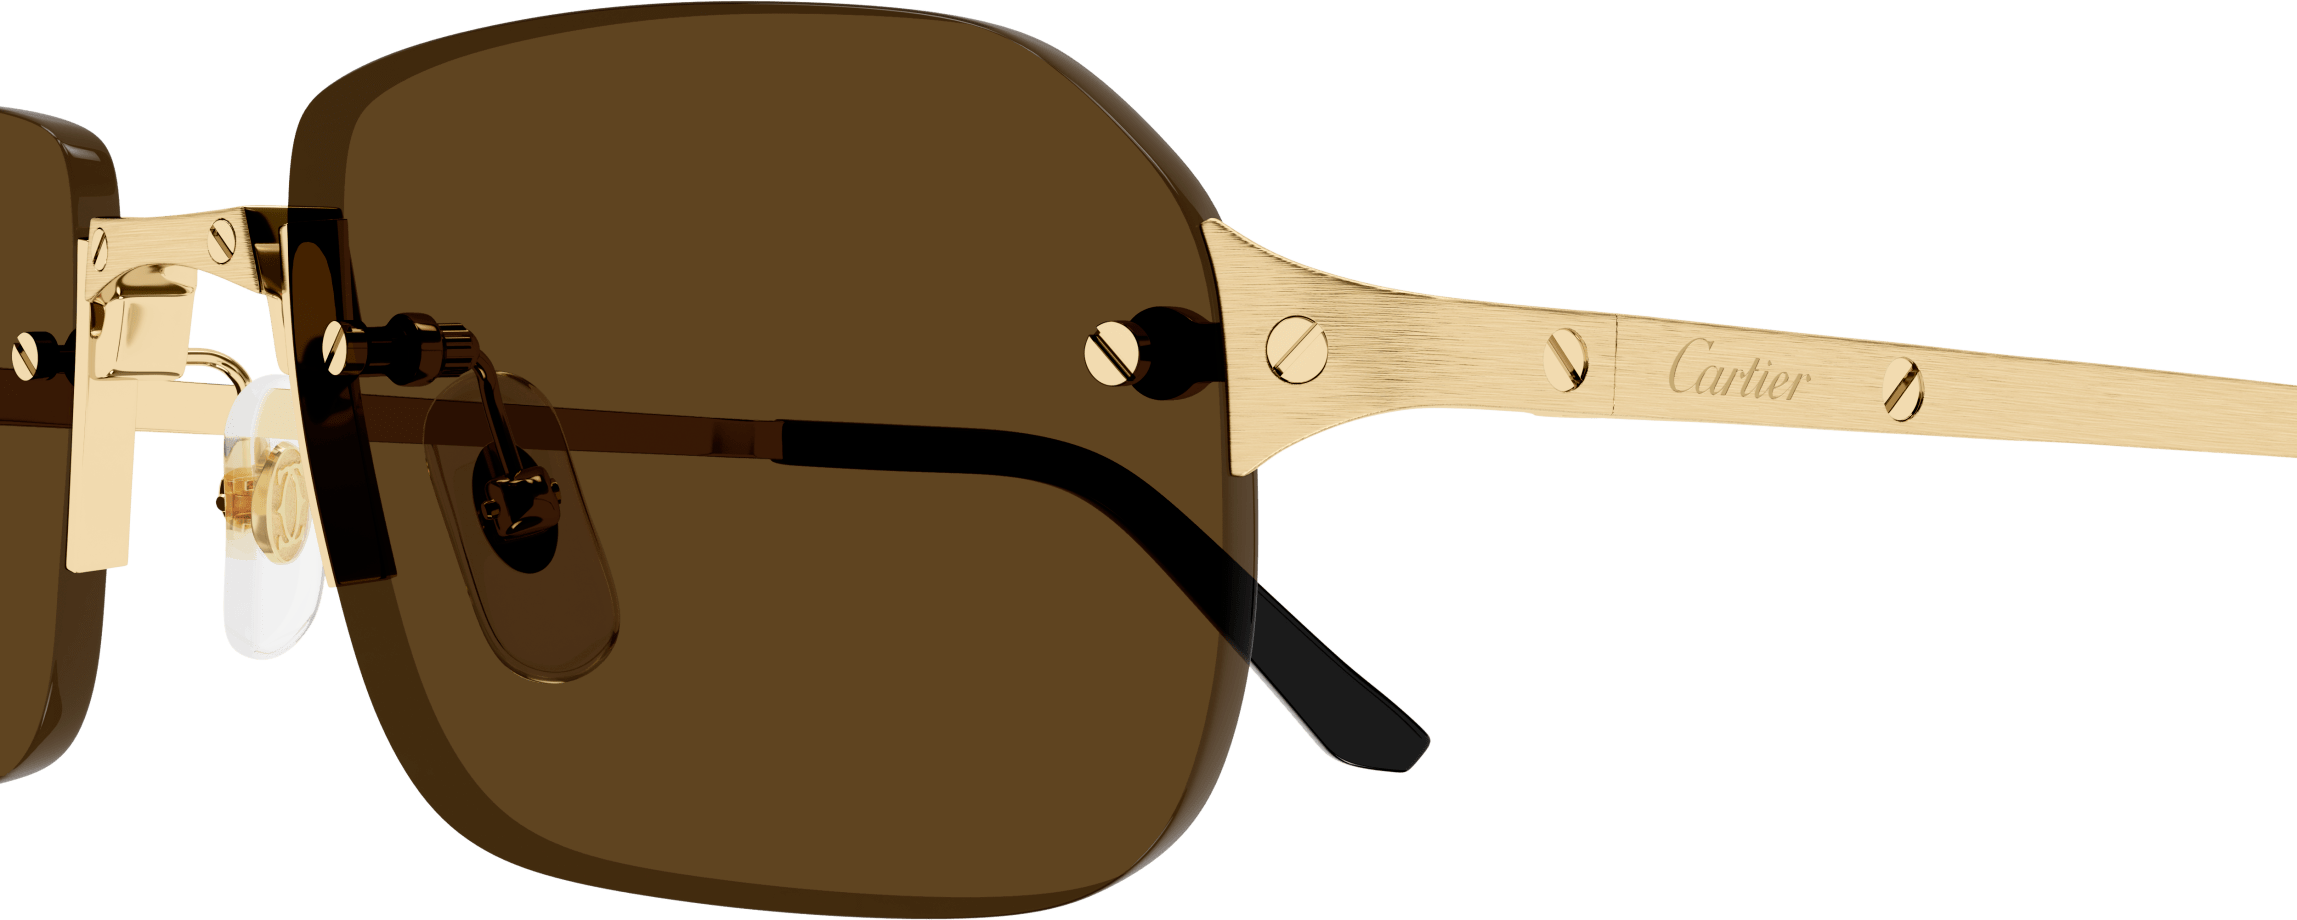 Color_CT0460S-002 - GOLD - BROWN - AR (ANTI REFLECTIVE)